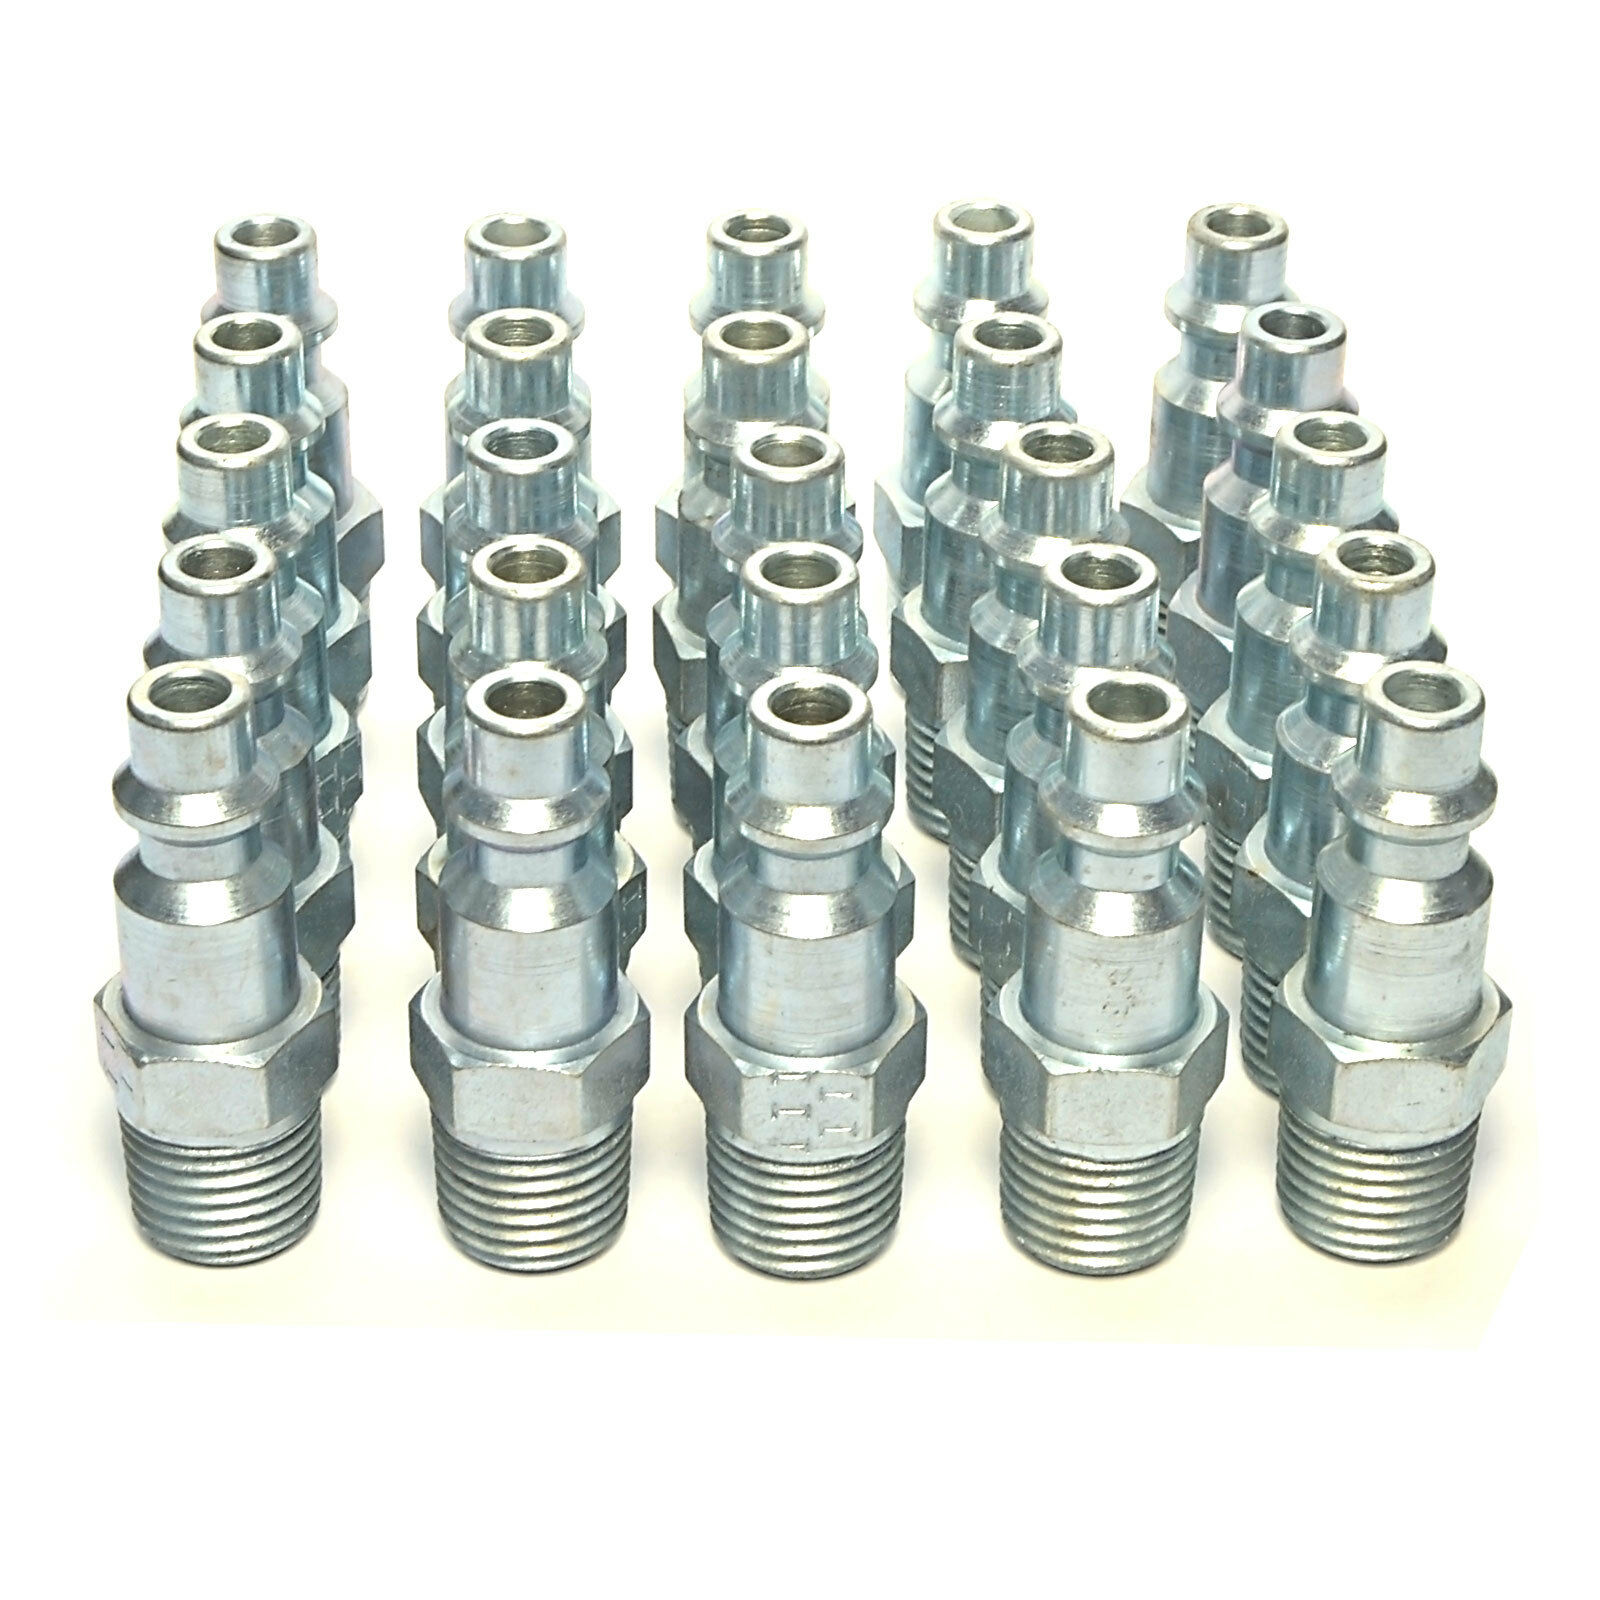 25 Foster 10-3 M Style Air Hose Fittings 1/4" Male Npt Coupler Plugs